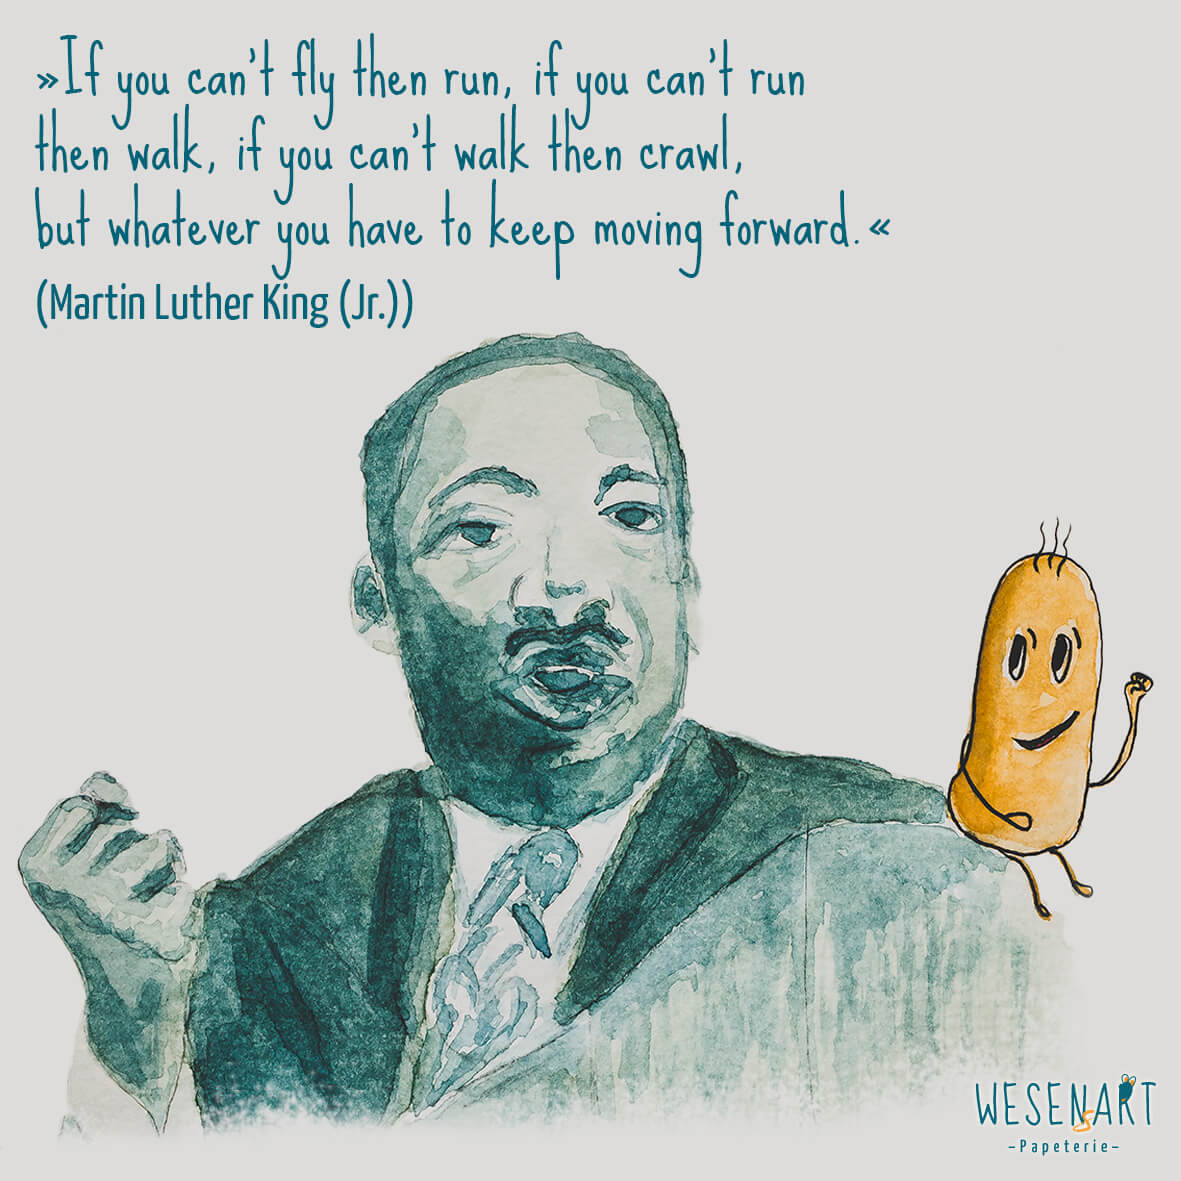 Martin Luther King (Jr.) und Consti plus Zitat: »If you can‘t fly then run, if you can‘t run �then walk, if you can‘t walk then crawl, but whatever you have to keep moving forward.«